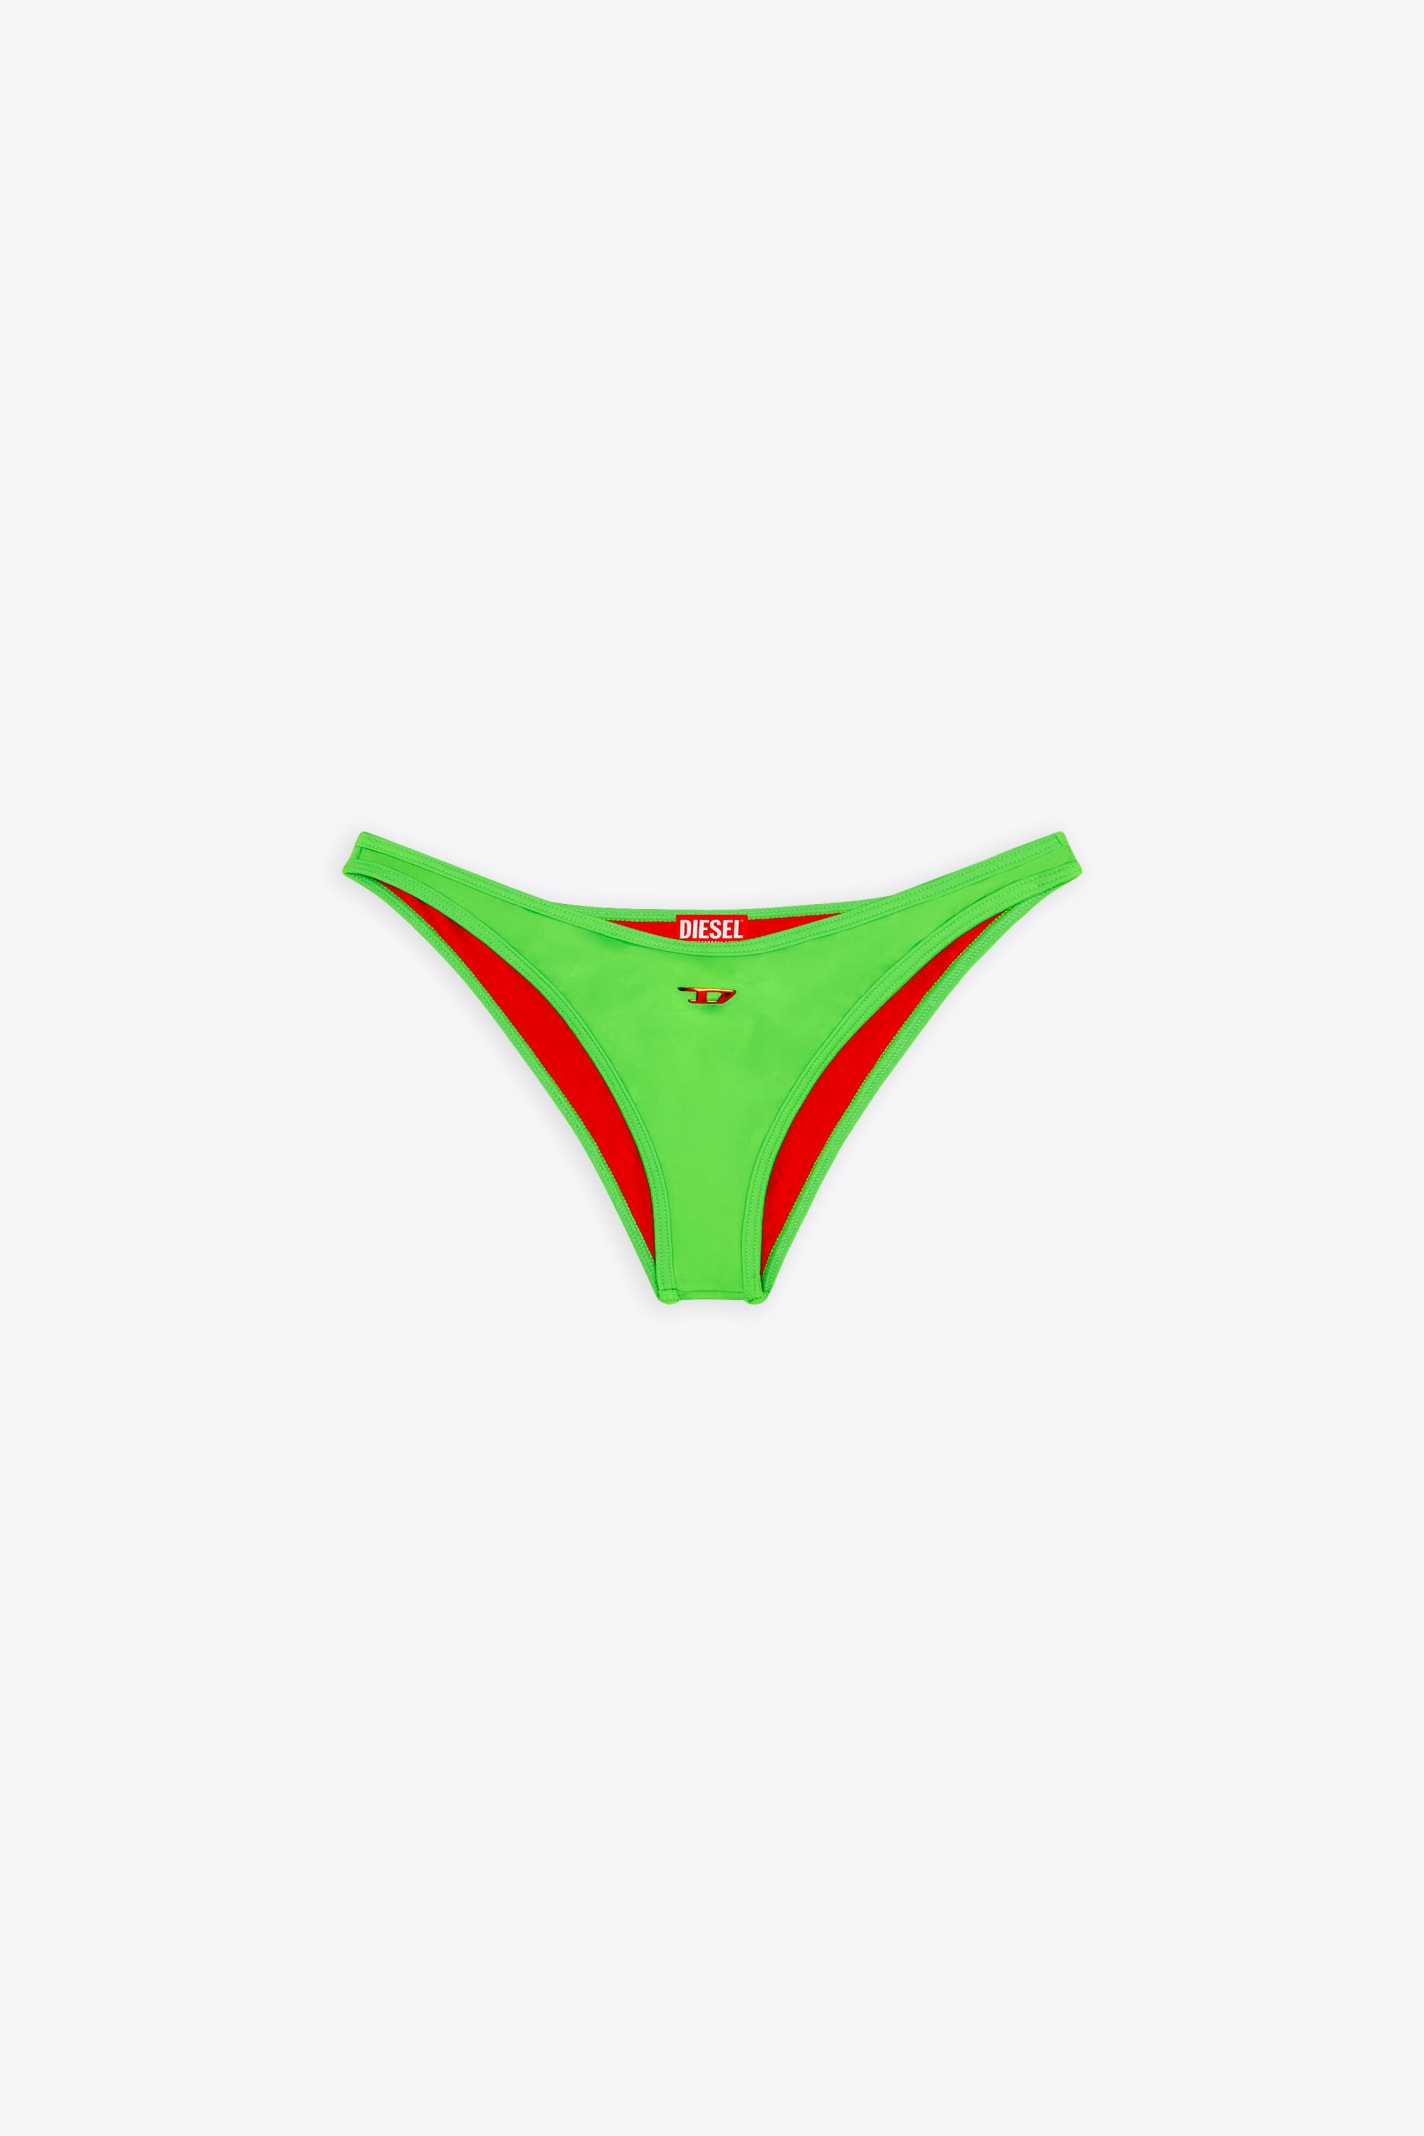 Bfpn-punchy-x Neon green lycra swim panties with Oval D logo - Bfpn Punchy X